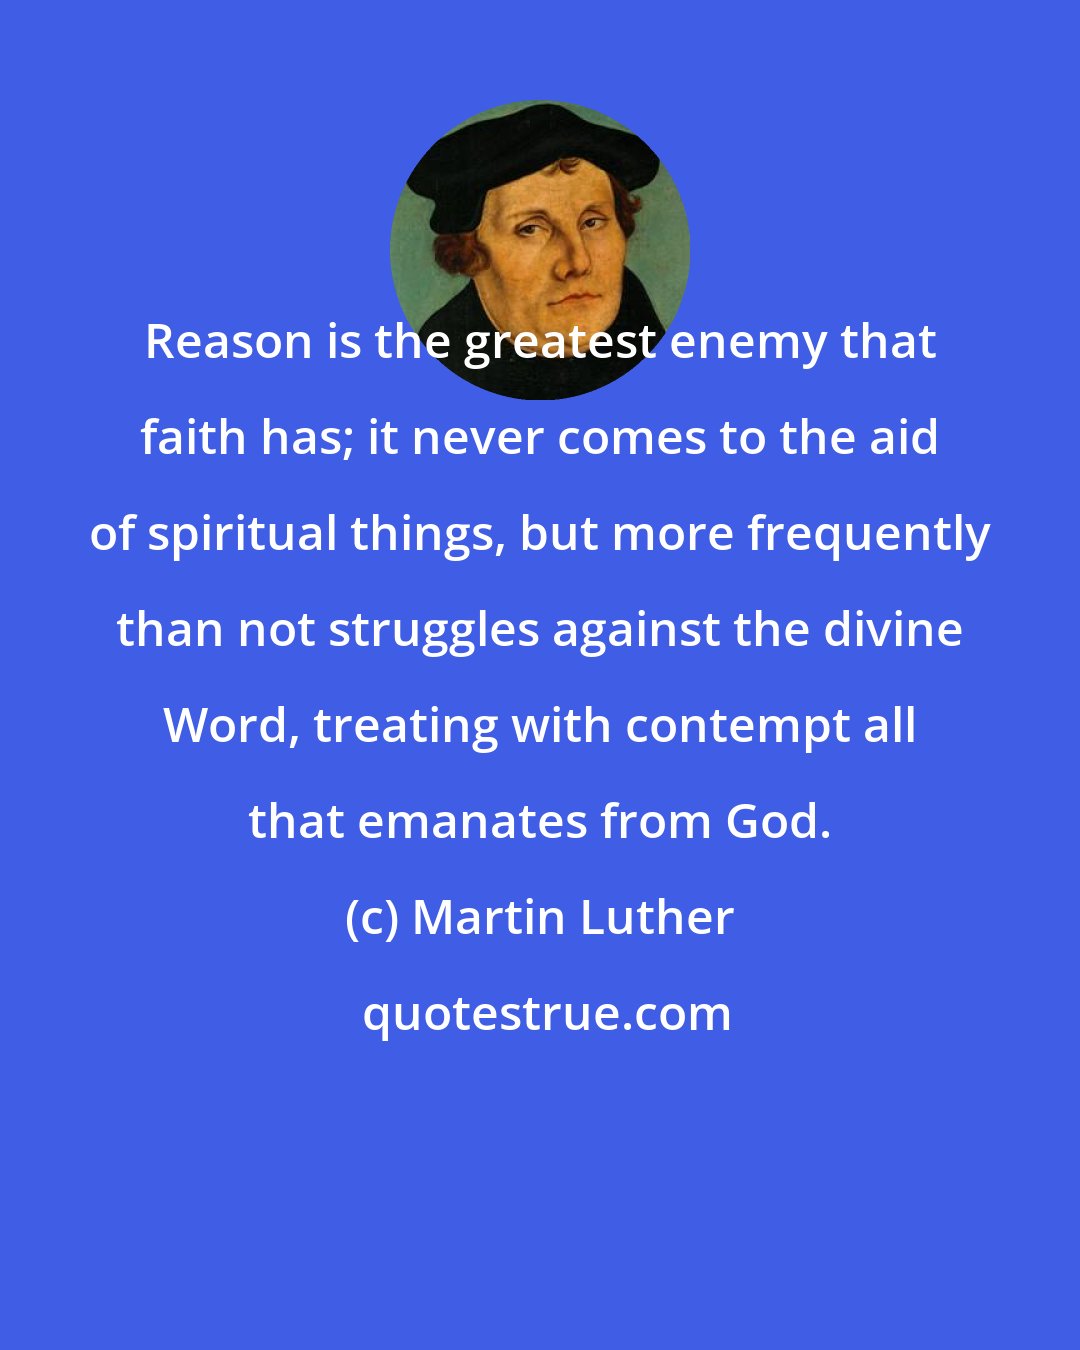 Martin Luther: Reason is the greatest enemy that faith has; it never comes to the aid of spiritual things, but more frequently than not struggles against the divine Word, treating with contempt all that emanates from God.